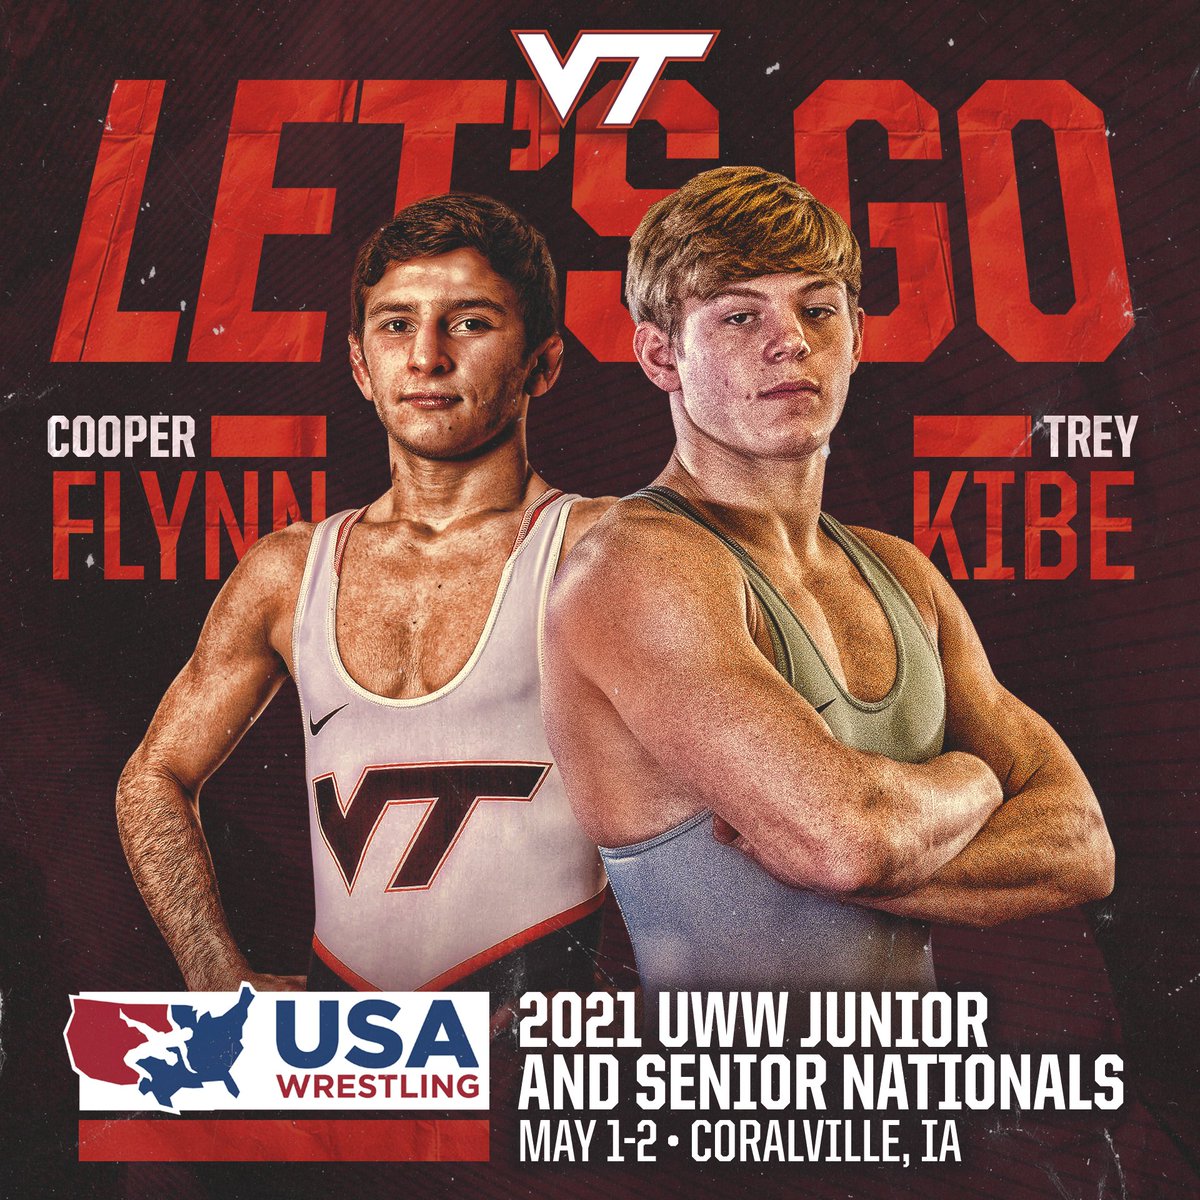 Wishing the best to incoming #Hokies 𝘾𝙤𝙤𝙥𝙚𝙧 𝙁𝙡𝙮𝙣𝙣 and 𝙏𝙧𝙚𝙮 𝙆𝙞𝙗𝙚 this weekend in Coralville, IA at the Junior World Team Trials‼️ 🦃